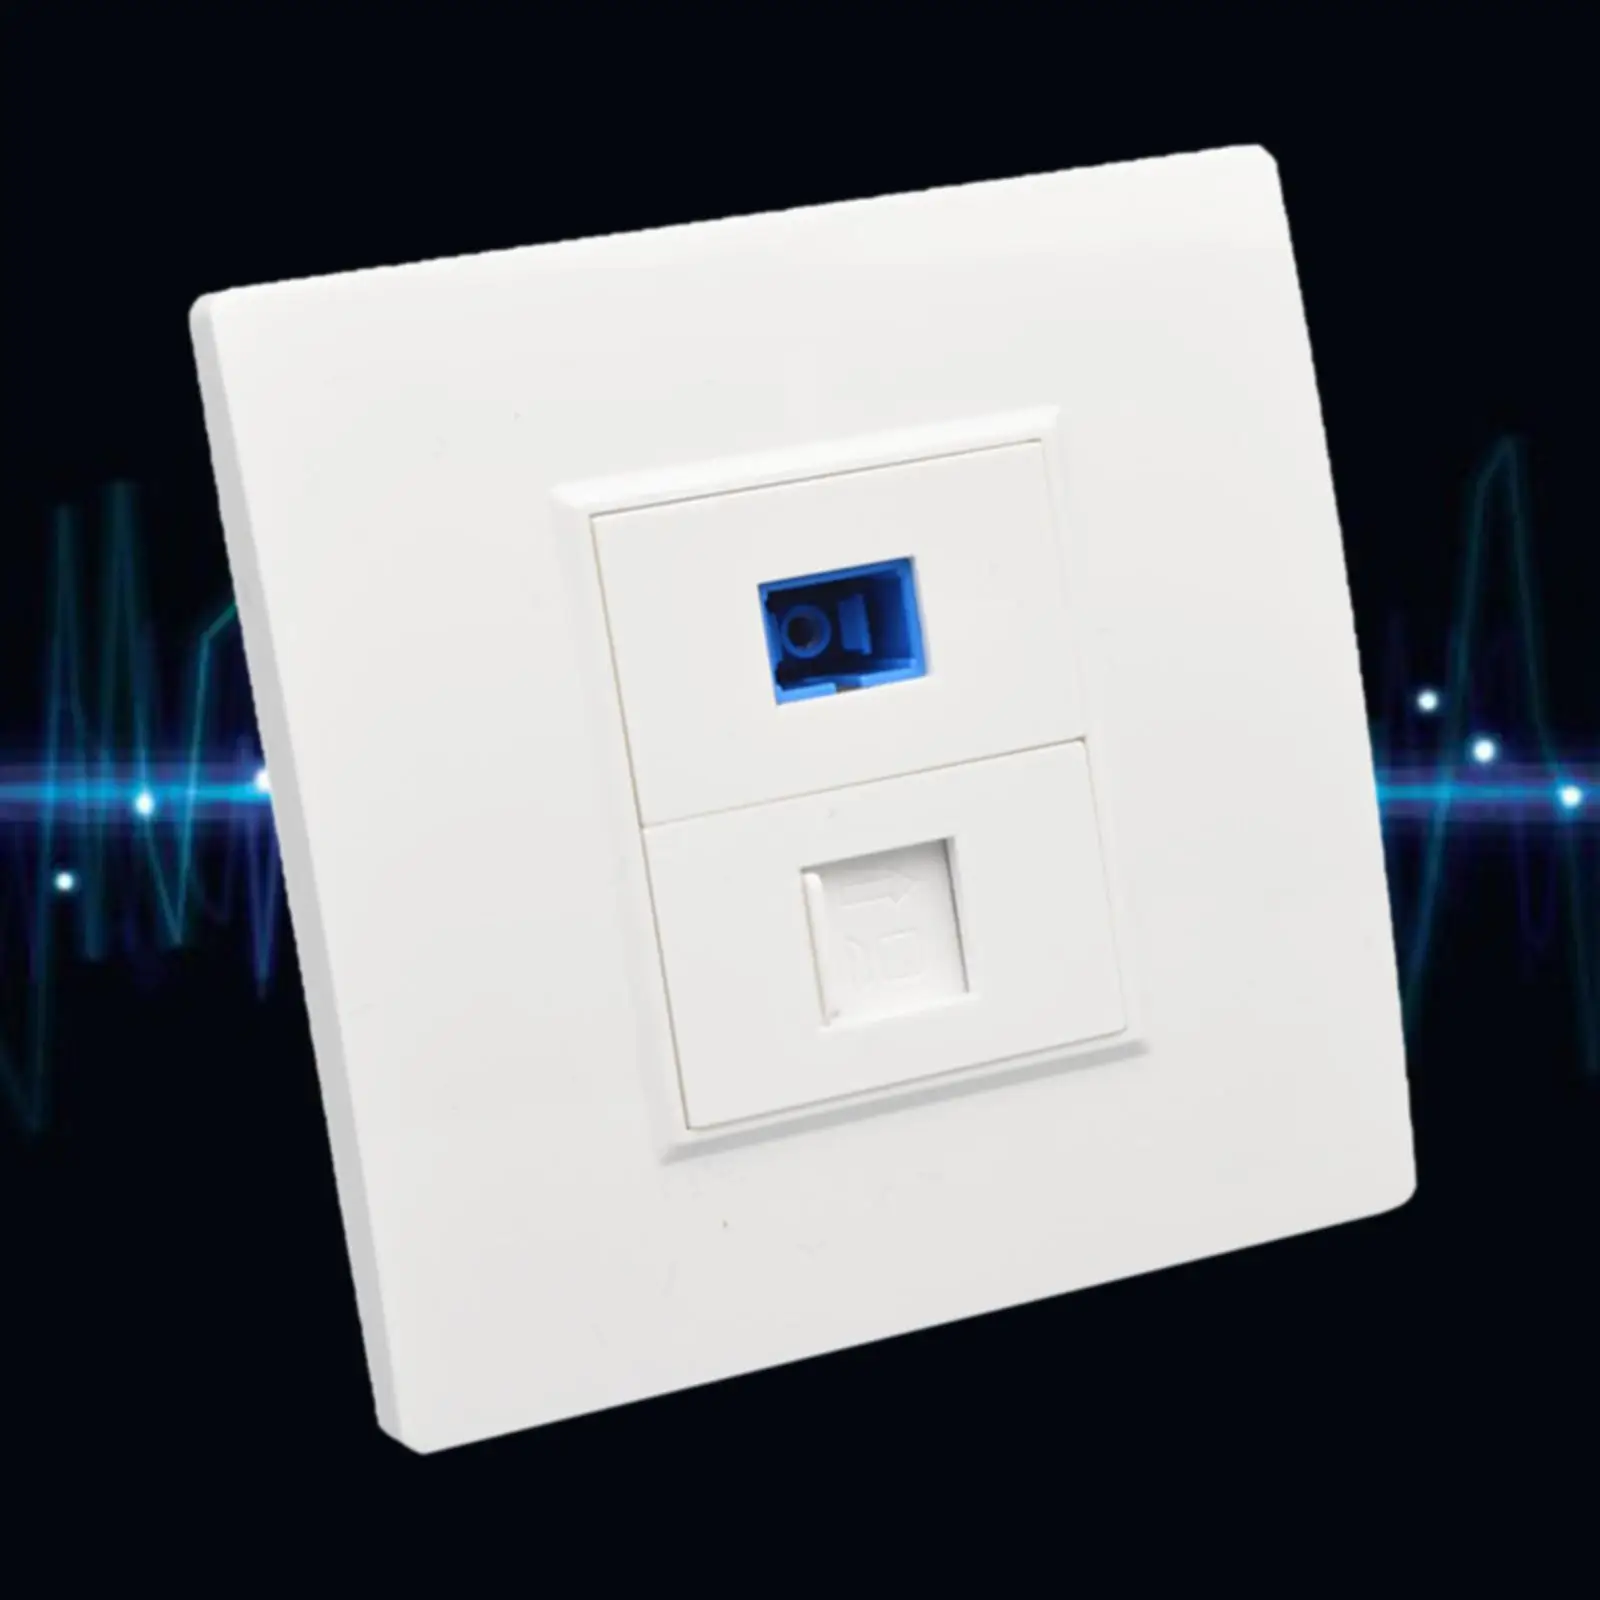 Network Wall Plate Outlet Supplies Socket Faceplate Easy Installation Durable